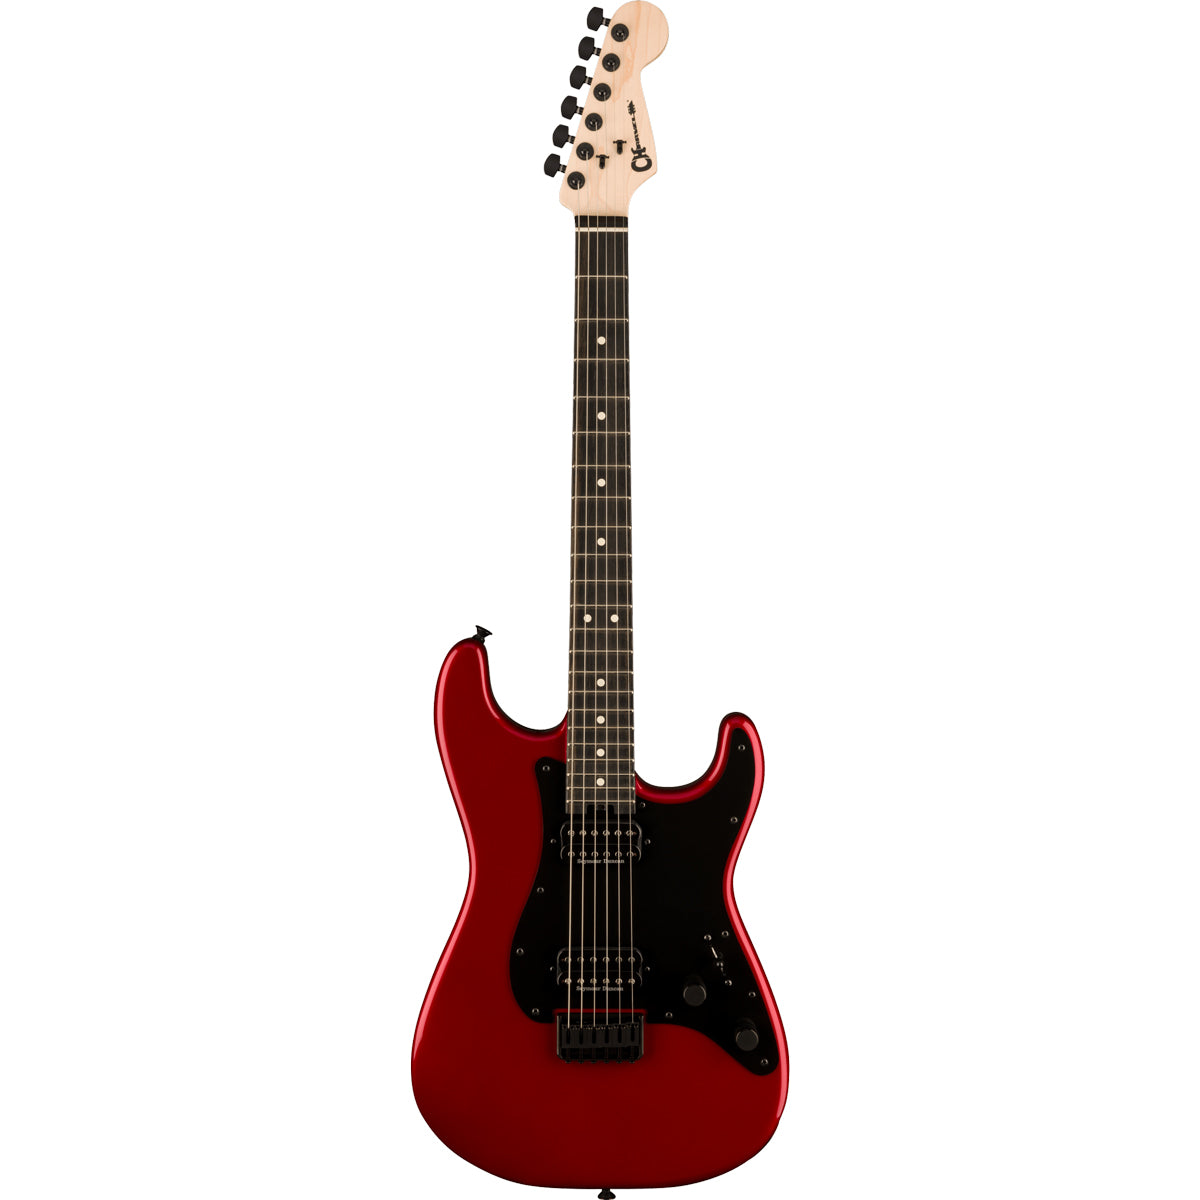 Charvel Pro-Mod So-Cal Style 1 HH HT Ebony Fingerboard Candy Apple Red